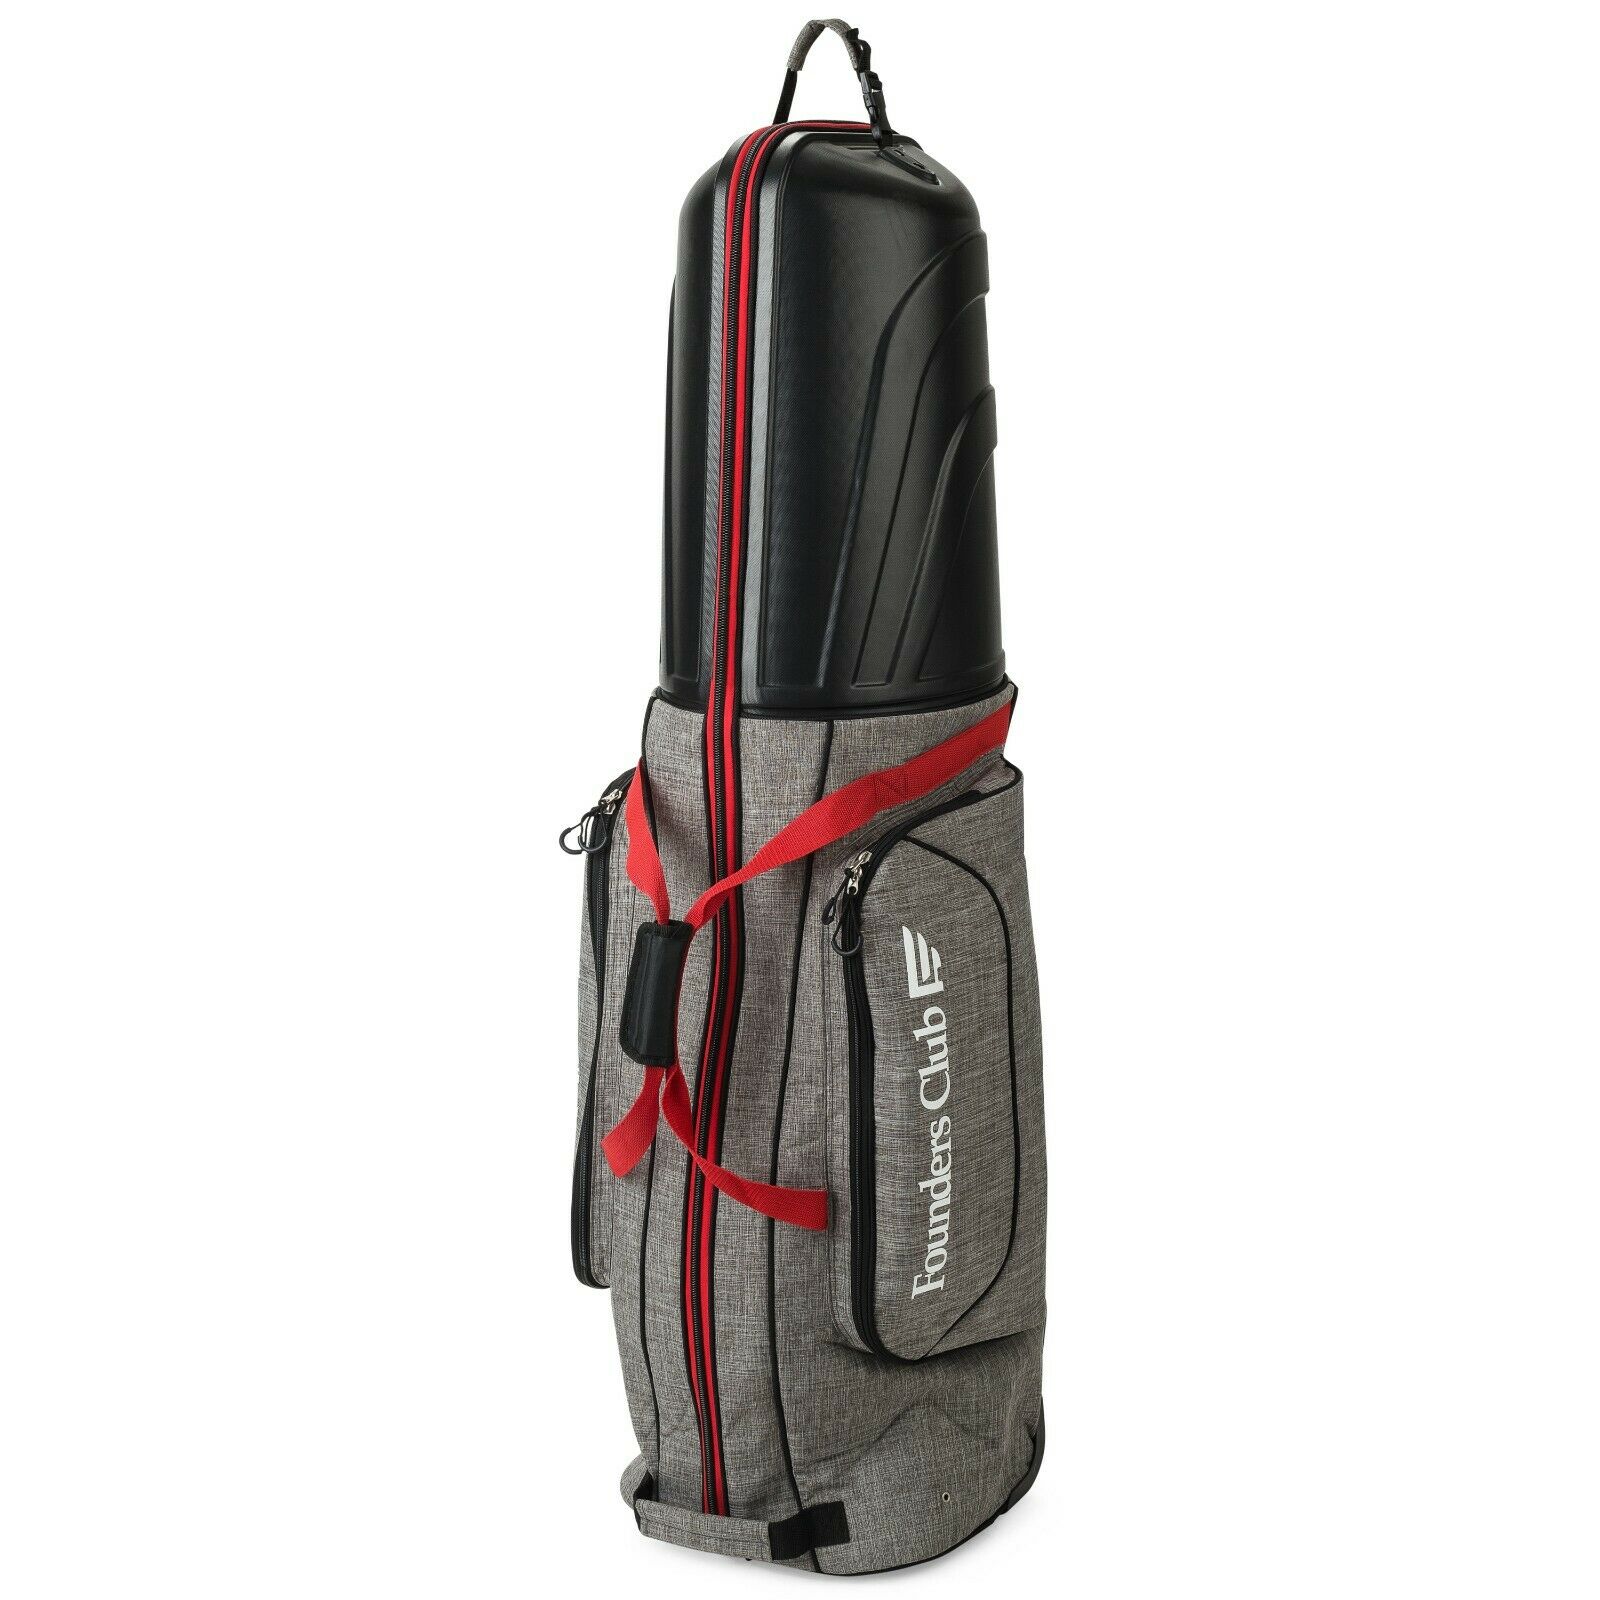 Founders Club Golf Club Travel Bag Travel Cover Luggage With Abs Hard Shell Top